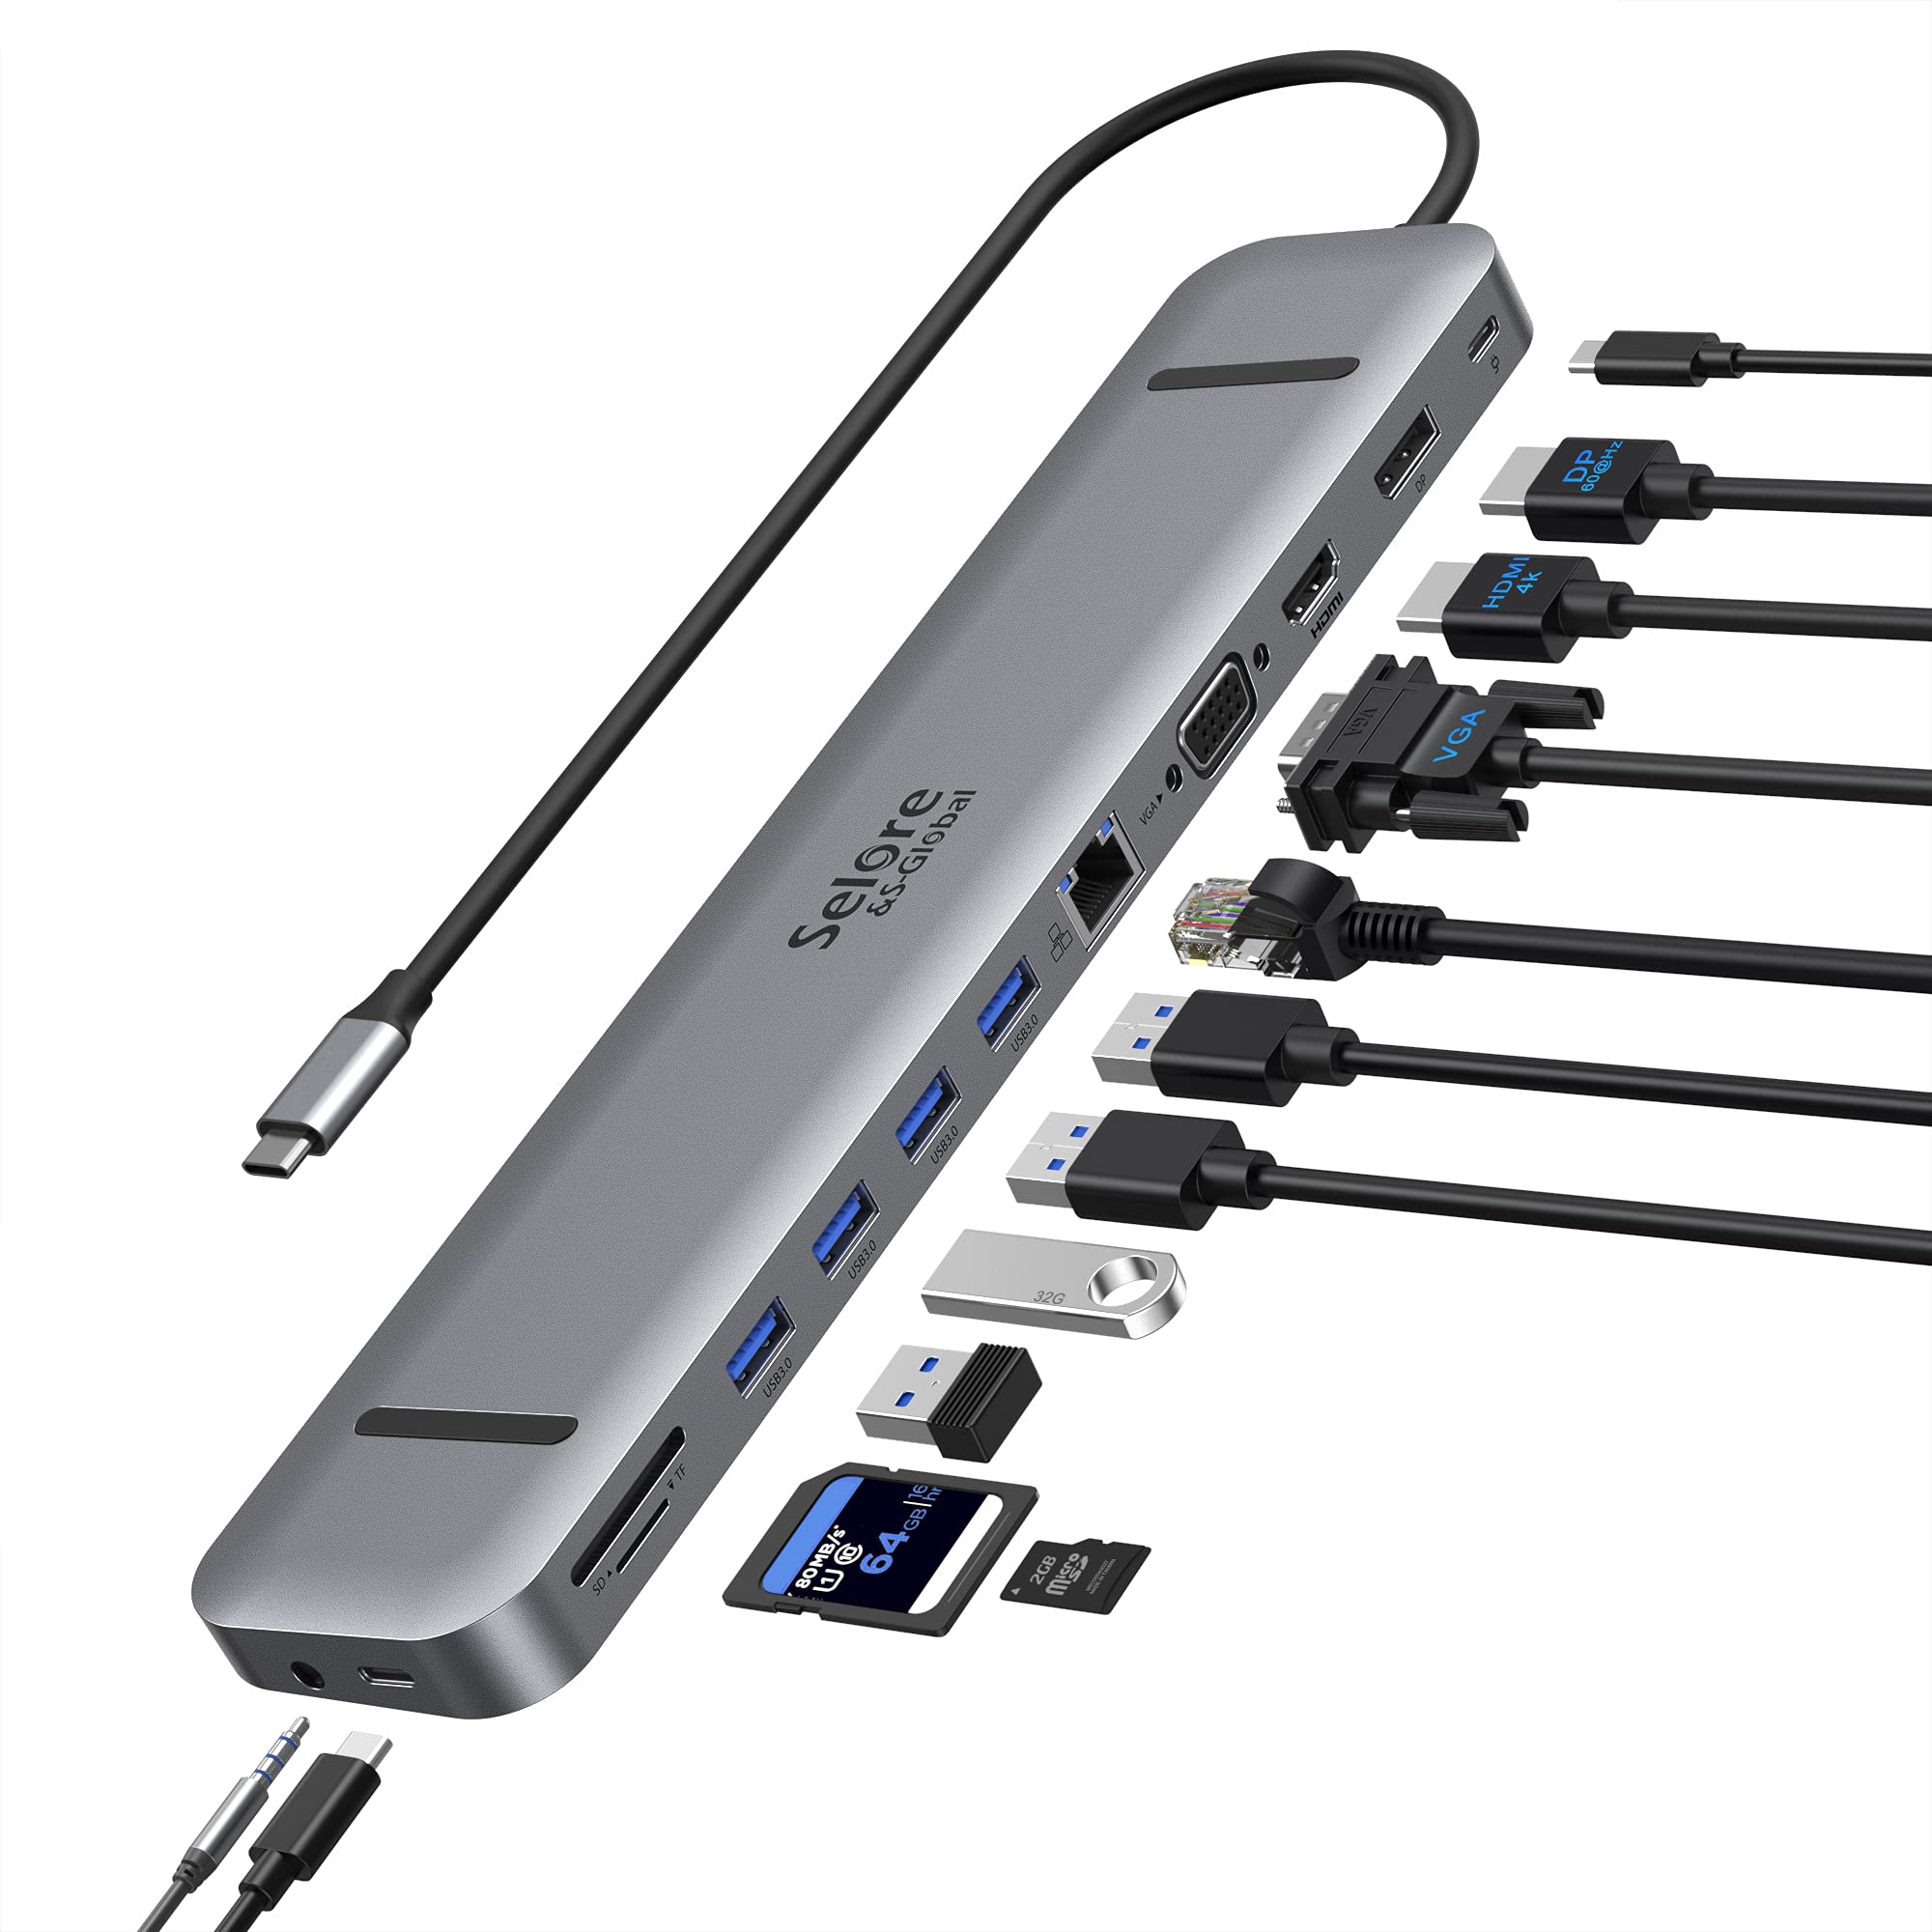 USB C Laptop Docking Station,13 in 1 Docking Station Triple Monitor with 4K HDMI,4K DP,VGA,Ethernet,4 USB,SD/TF,USB-C Port,Audio/Mic,USB C Hub Multiport Adapter for MacBook/Dell/HP/Lenovo/Surface…